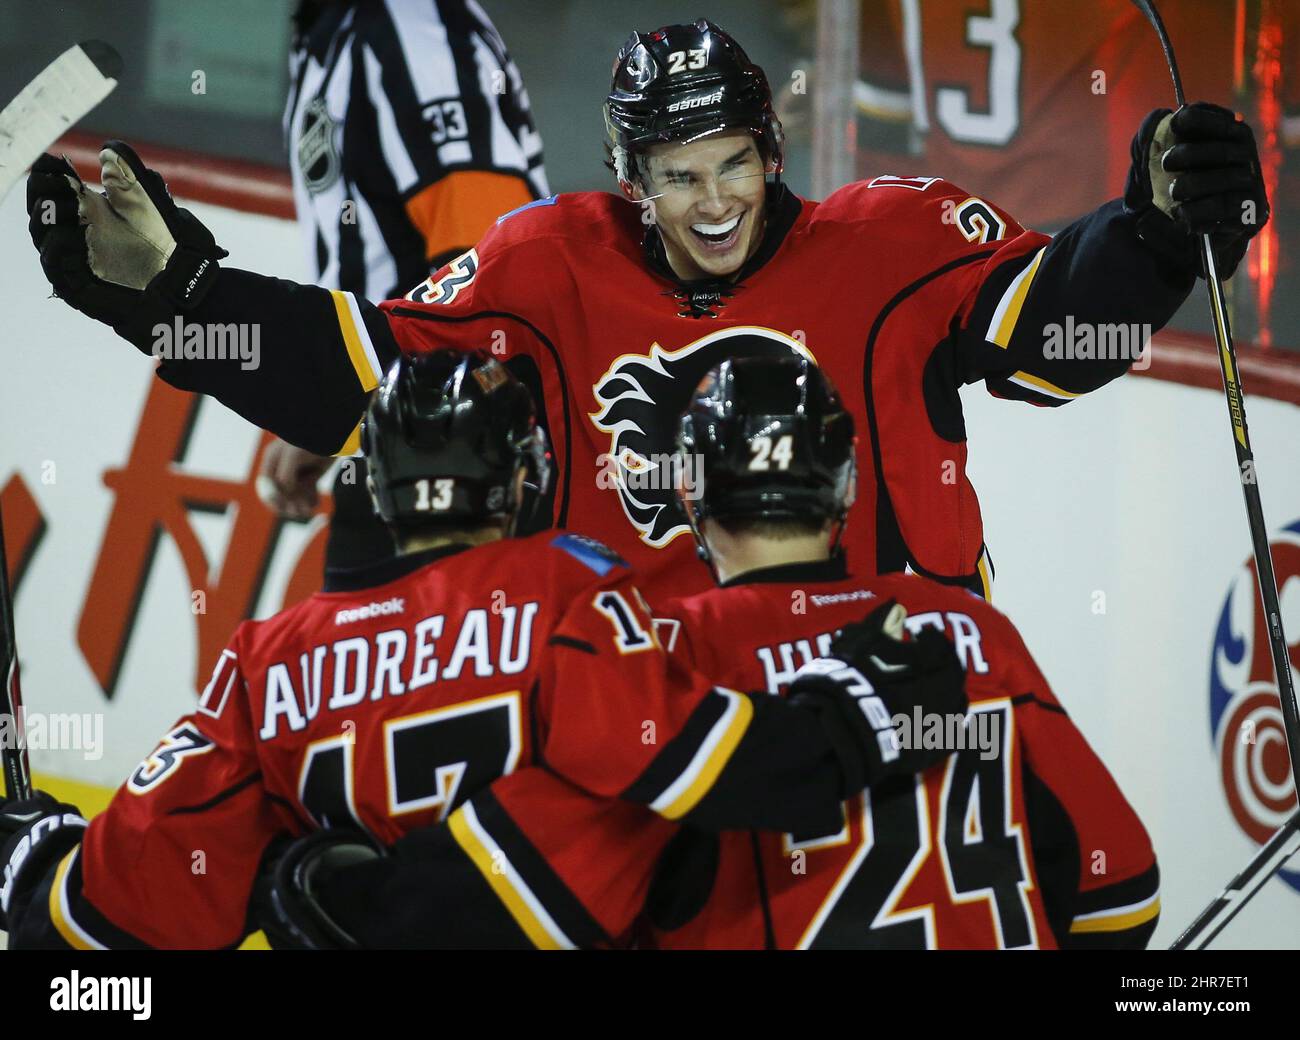 Johnny Gaudreau and Sean Monahan sticking together - Sports